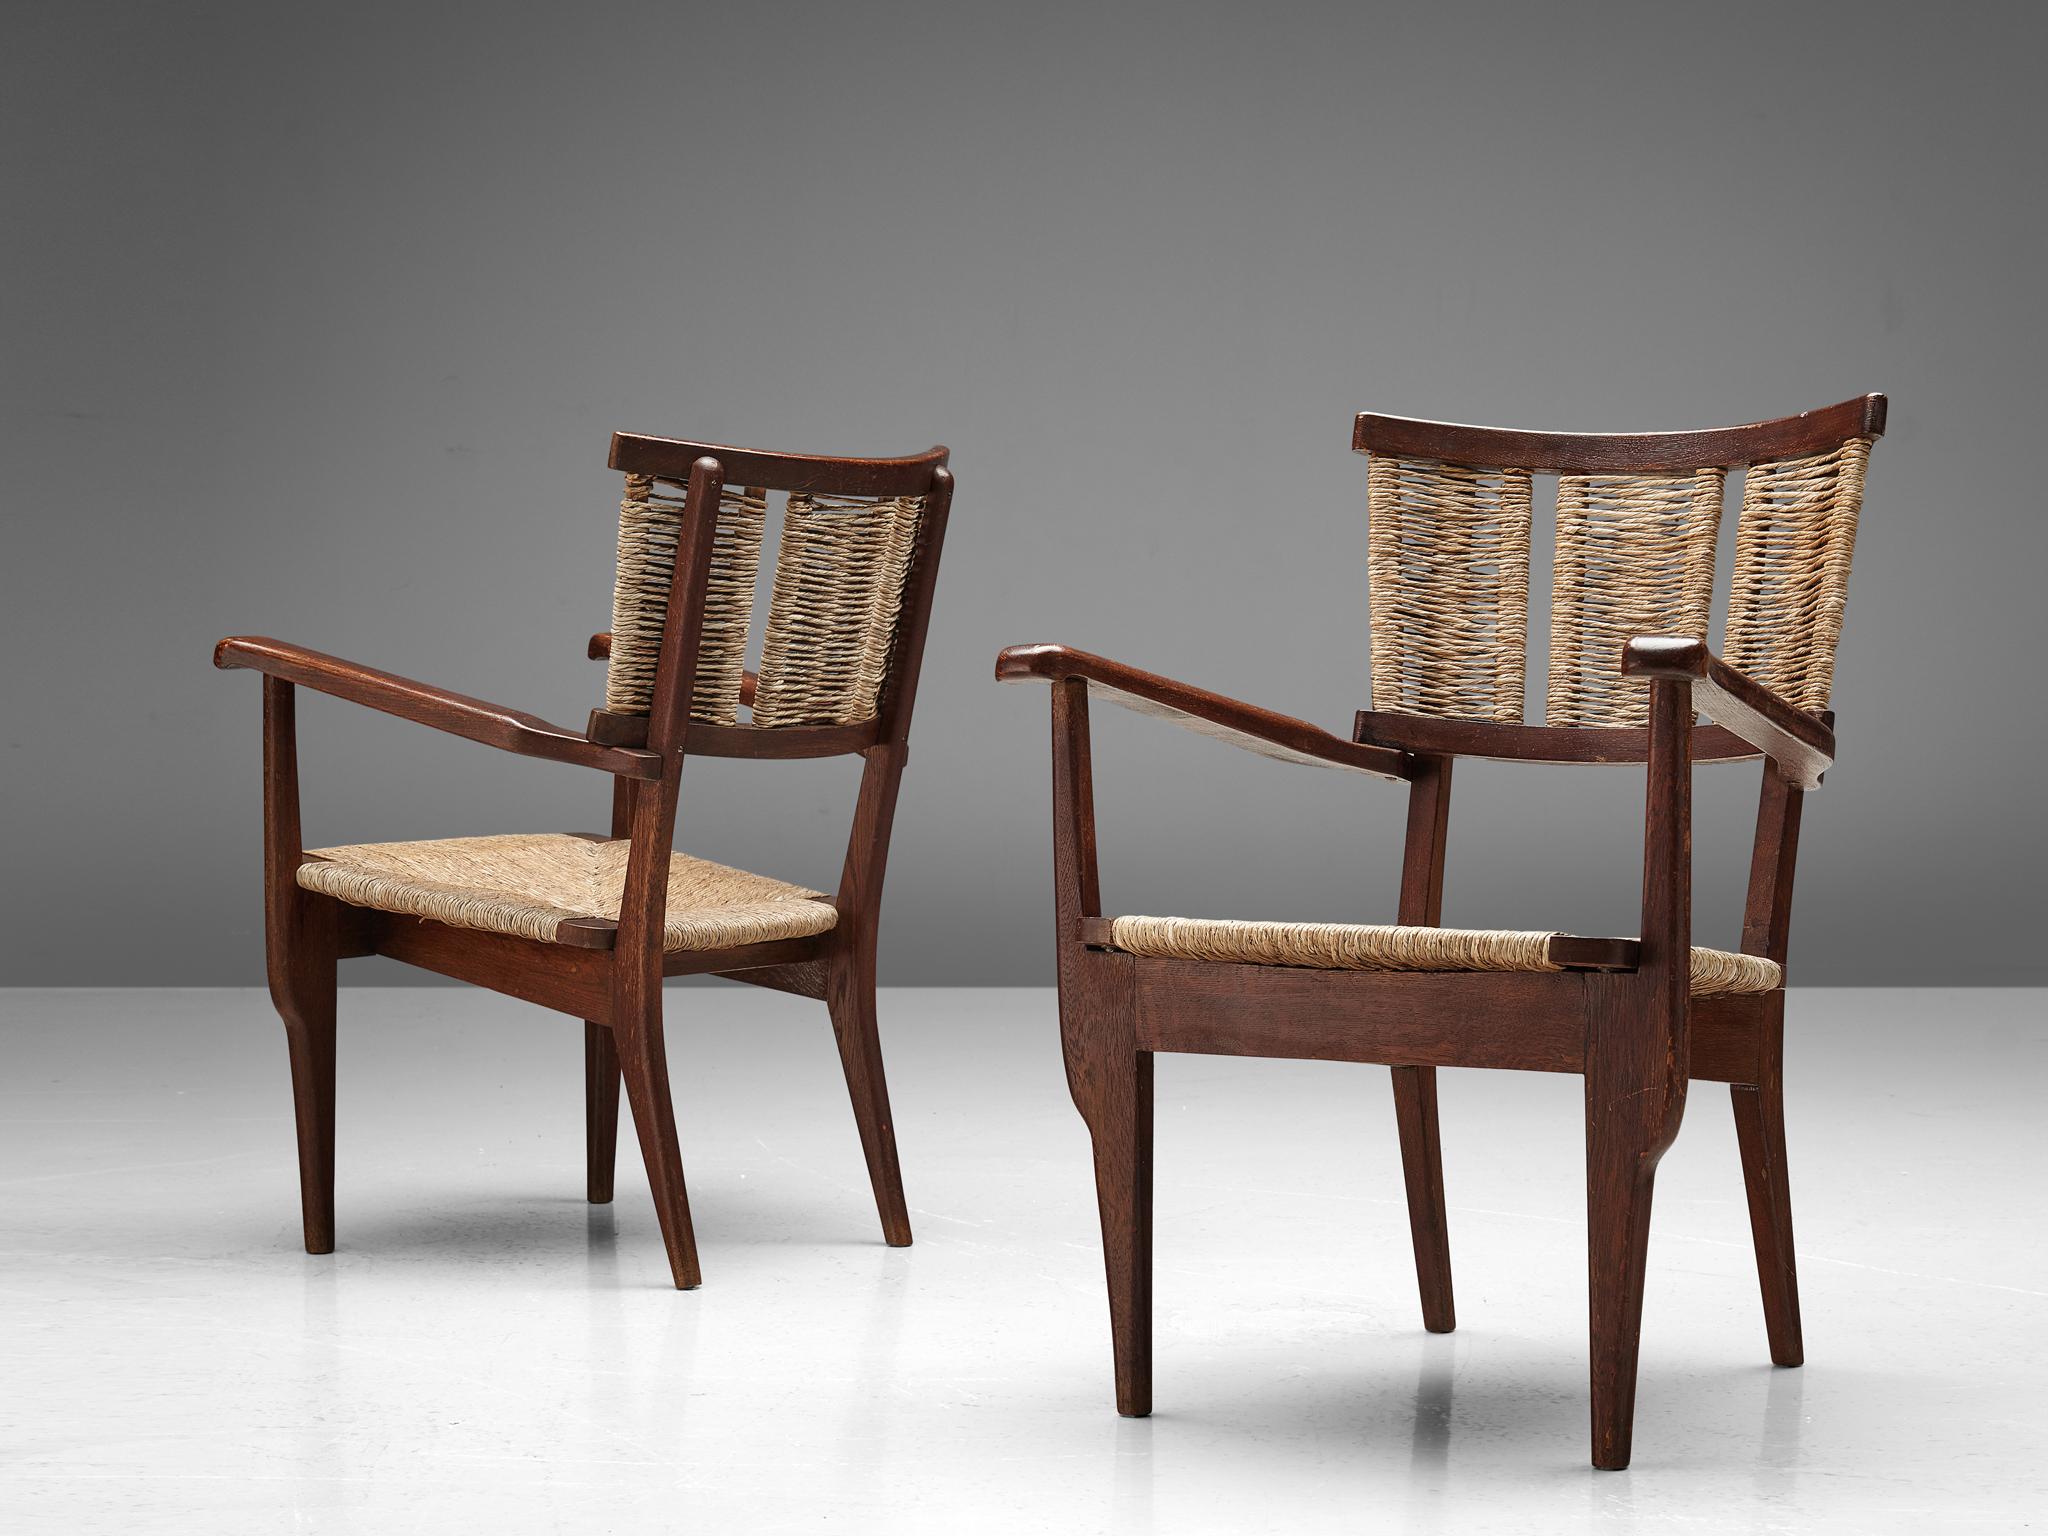 Mart Stam, armchairs, oak, straw, The Netherlands, 1947. 

Elegant armchair in solid oak and woven straw. This chair shows the characteristic frame of the influential Dutch designer Mart Stam (1899-1986). The backrest and seat are covered with straw